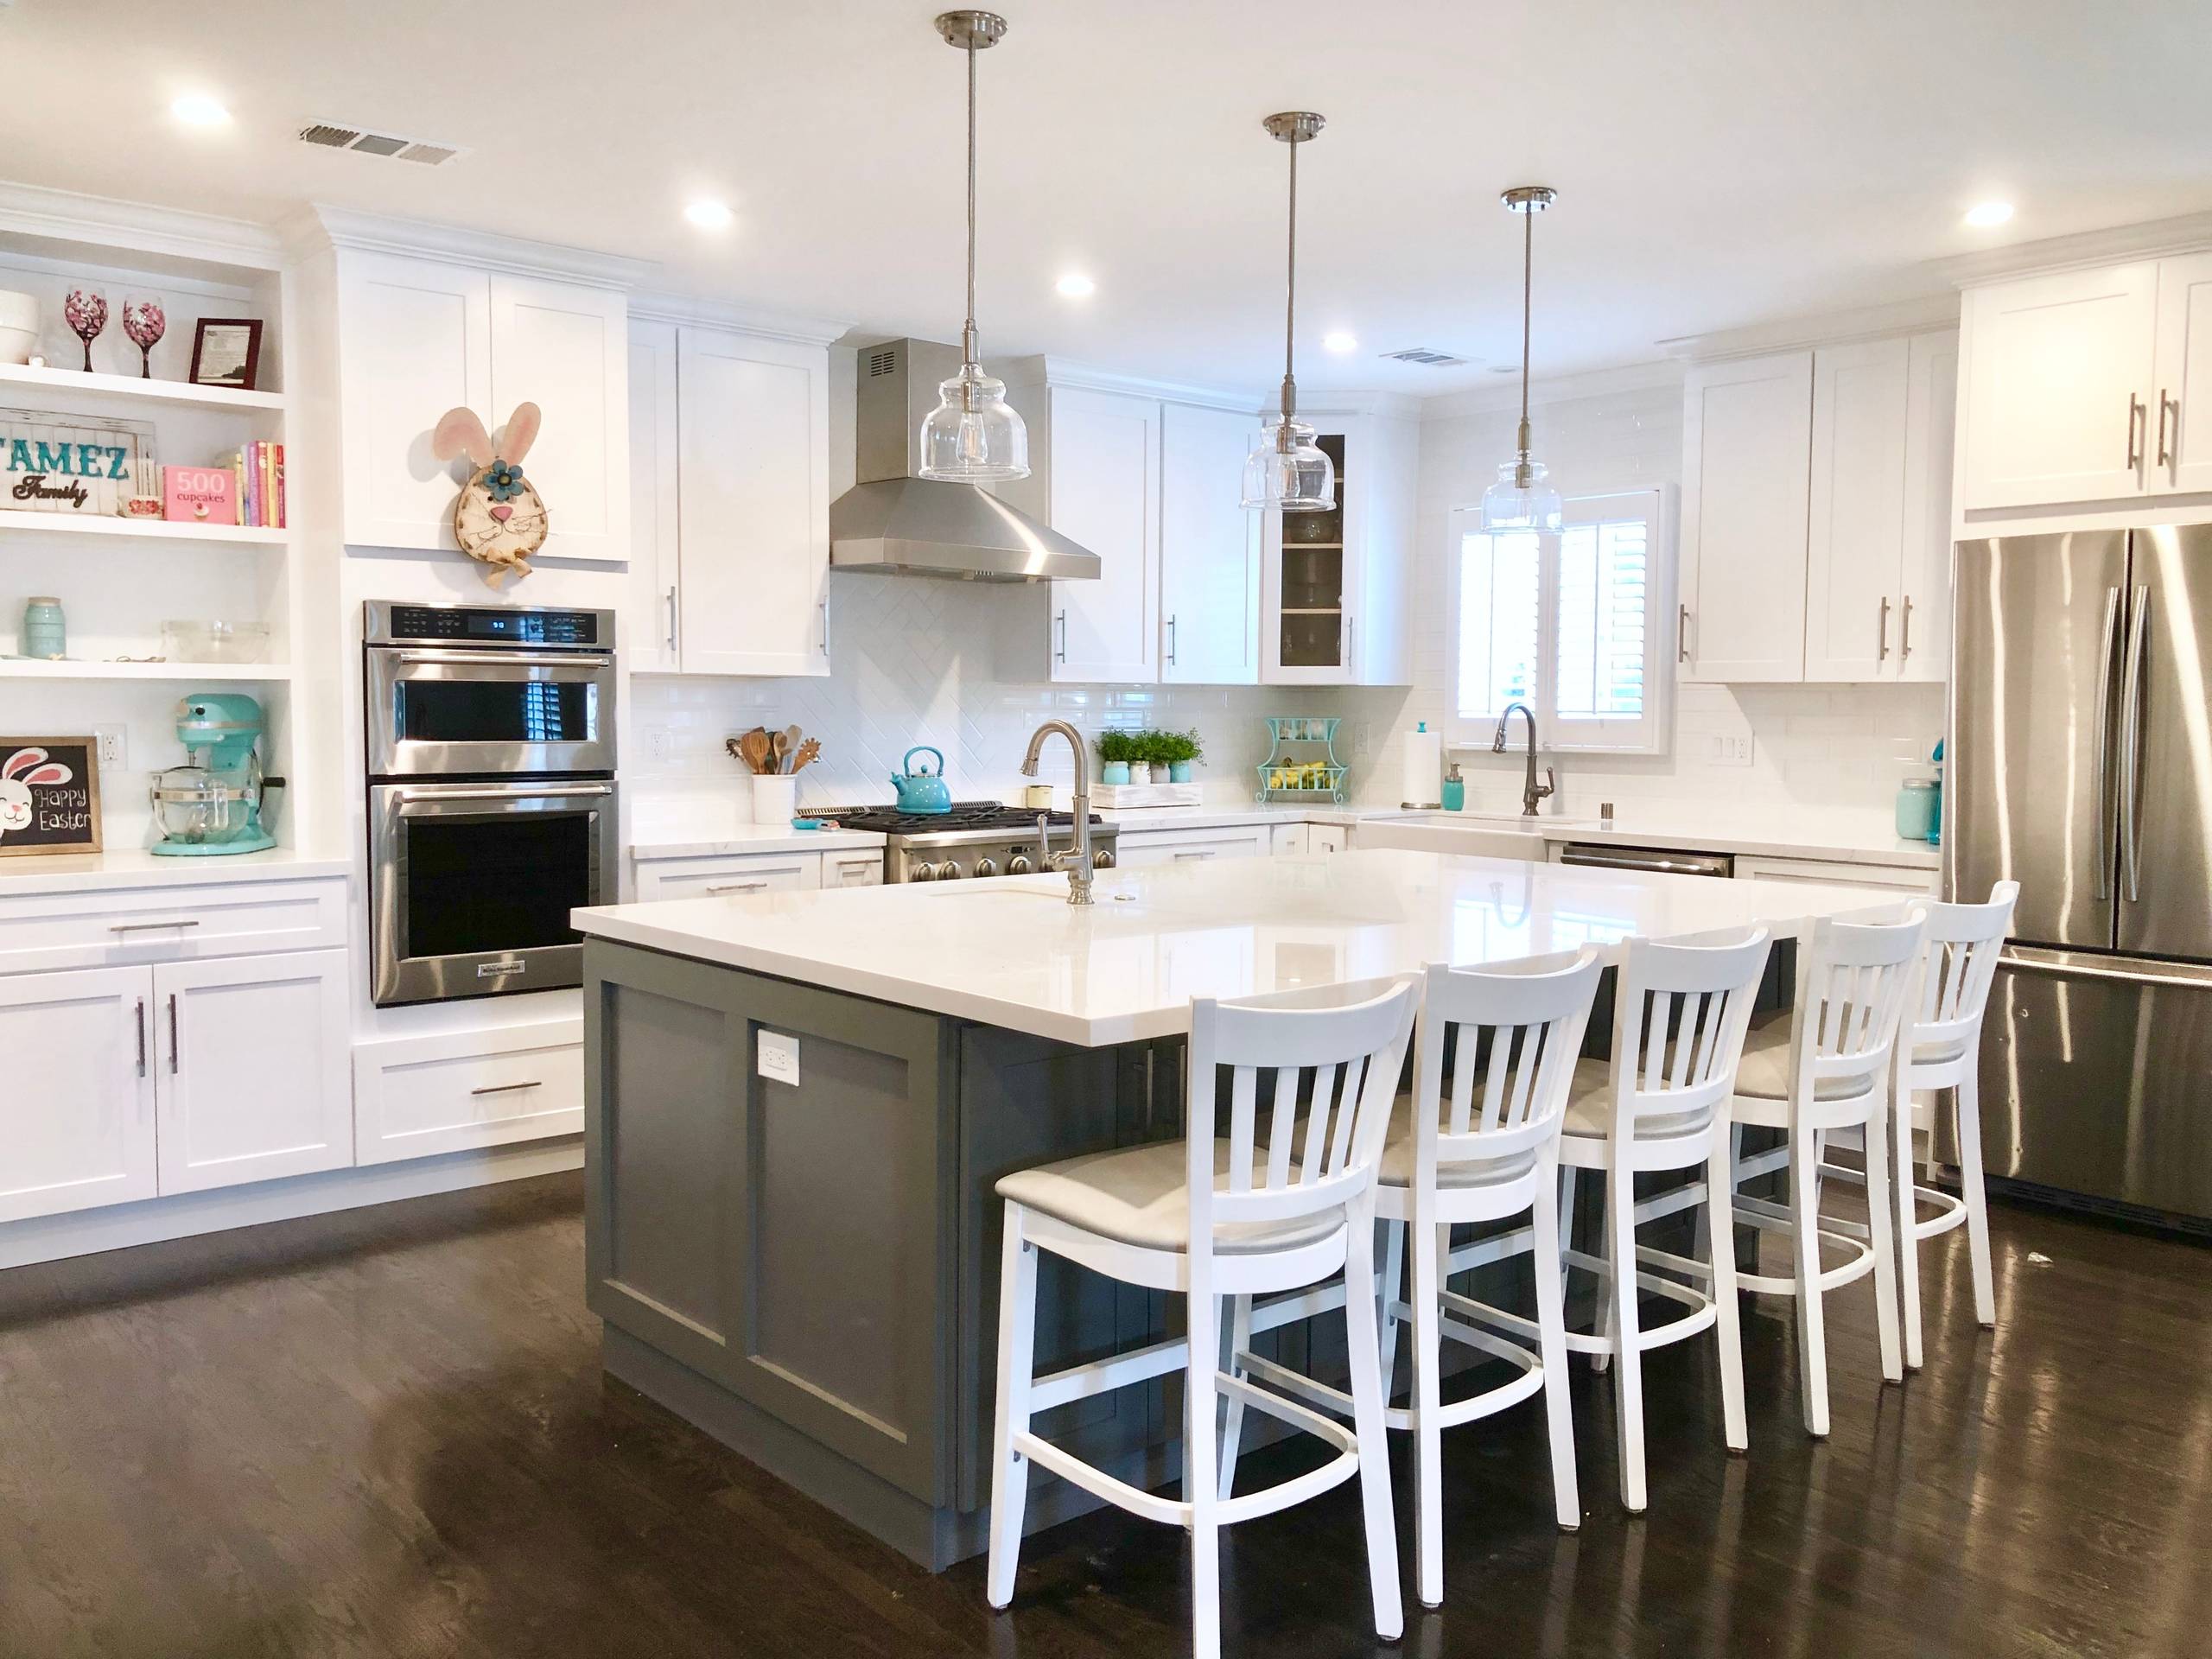 Complete Kitchen Remodel and Addition to an Existing Home; Flooring, Island, Cab